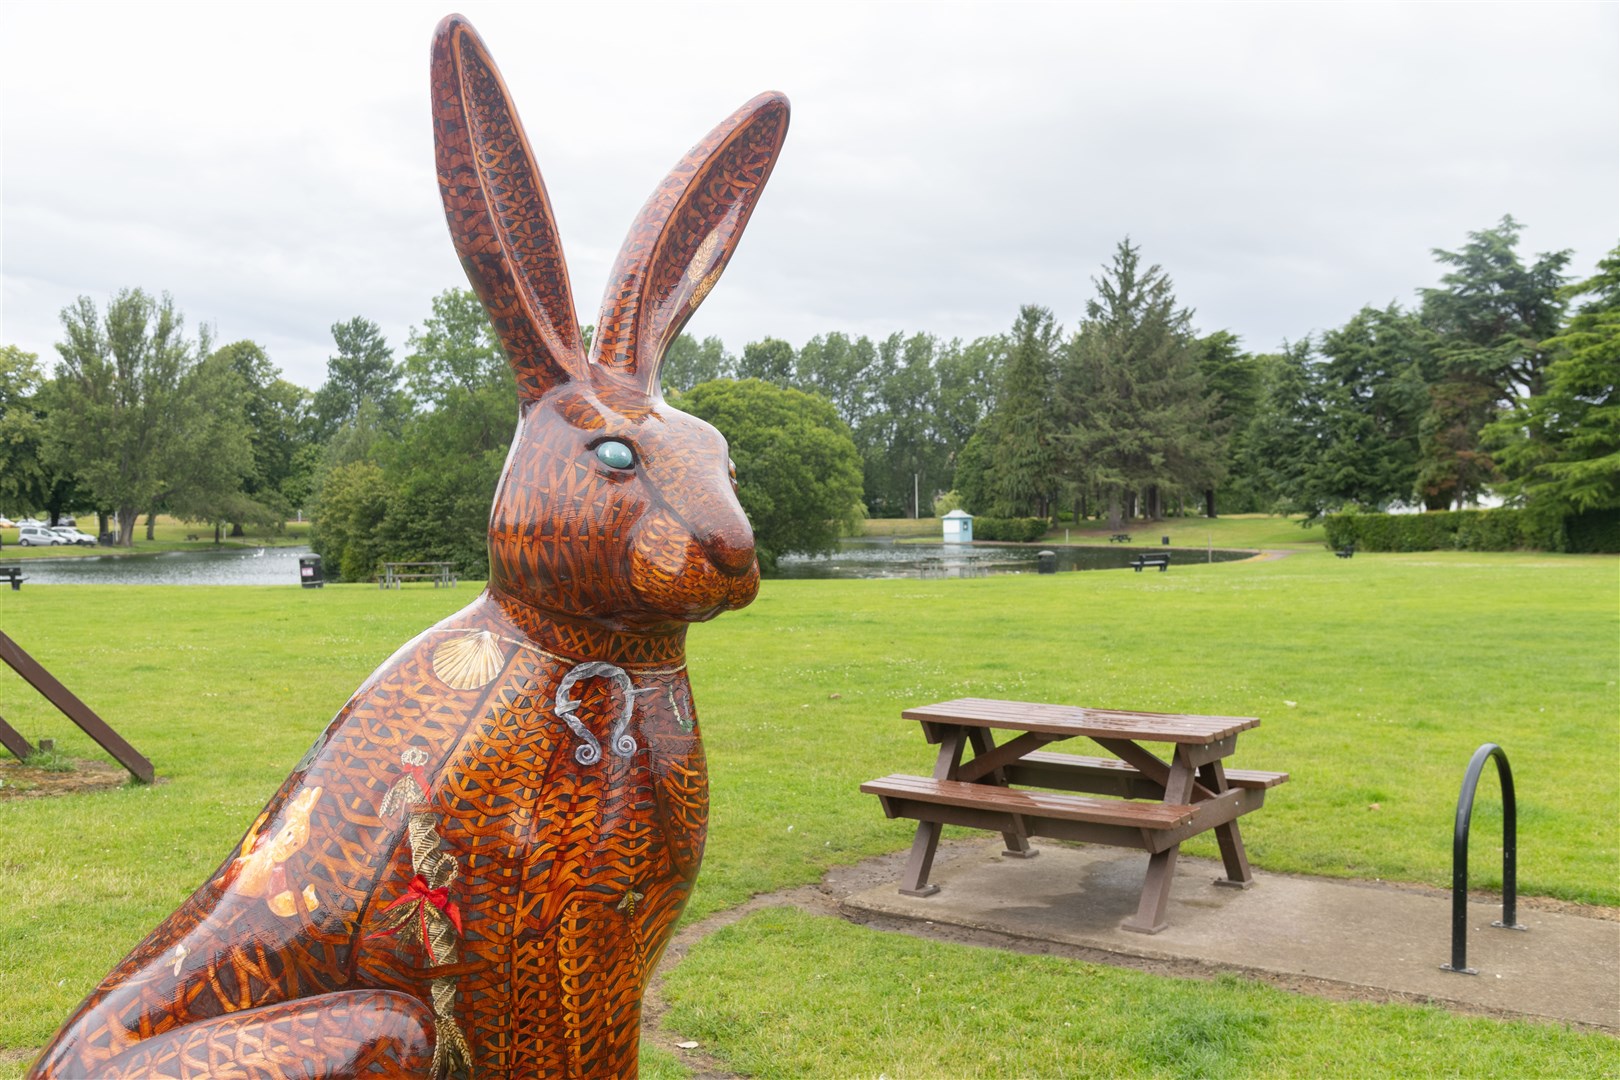 The Wicker Hare has a great view over the Cooper Park. Picture: Beth Taylor